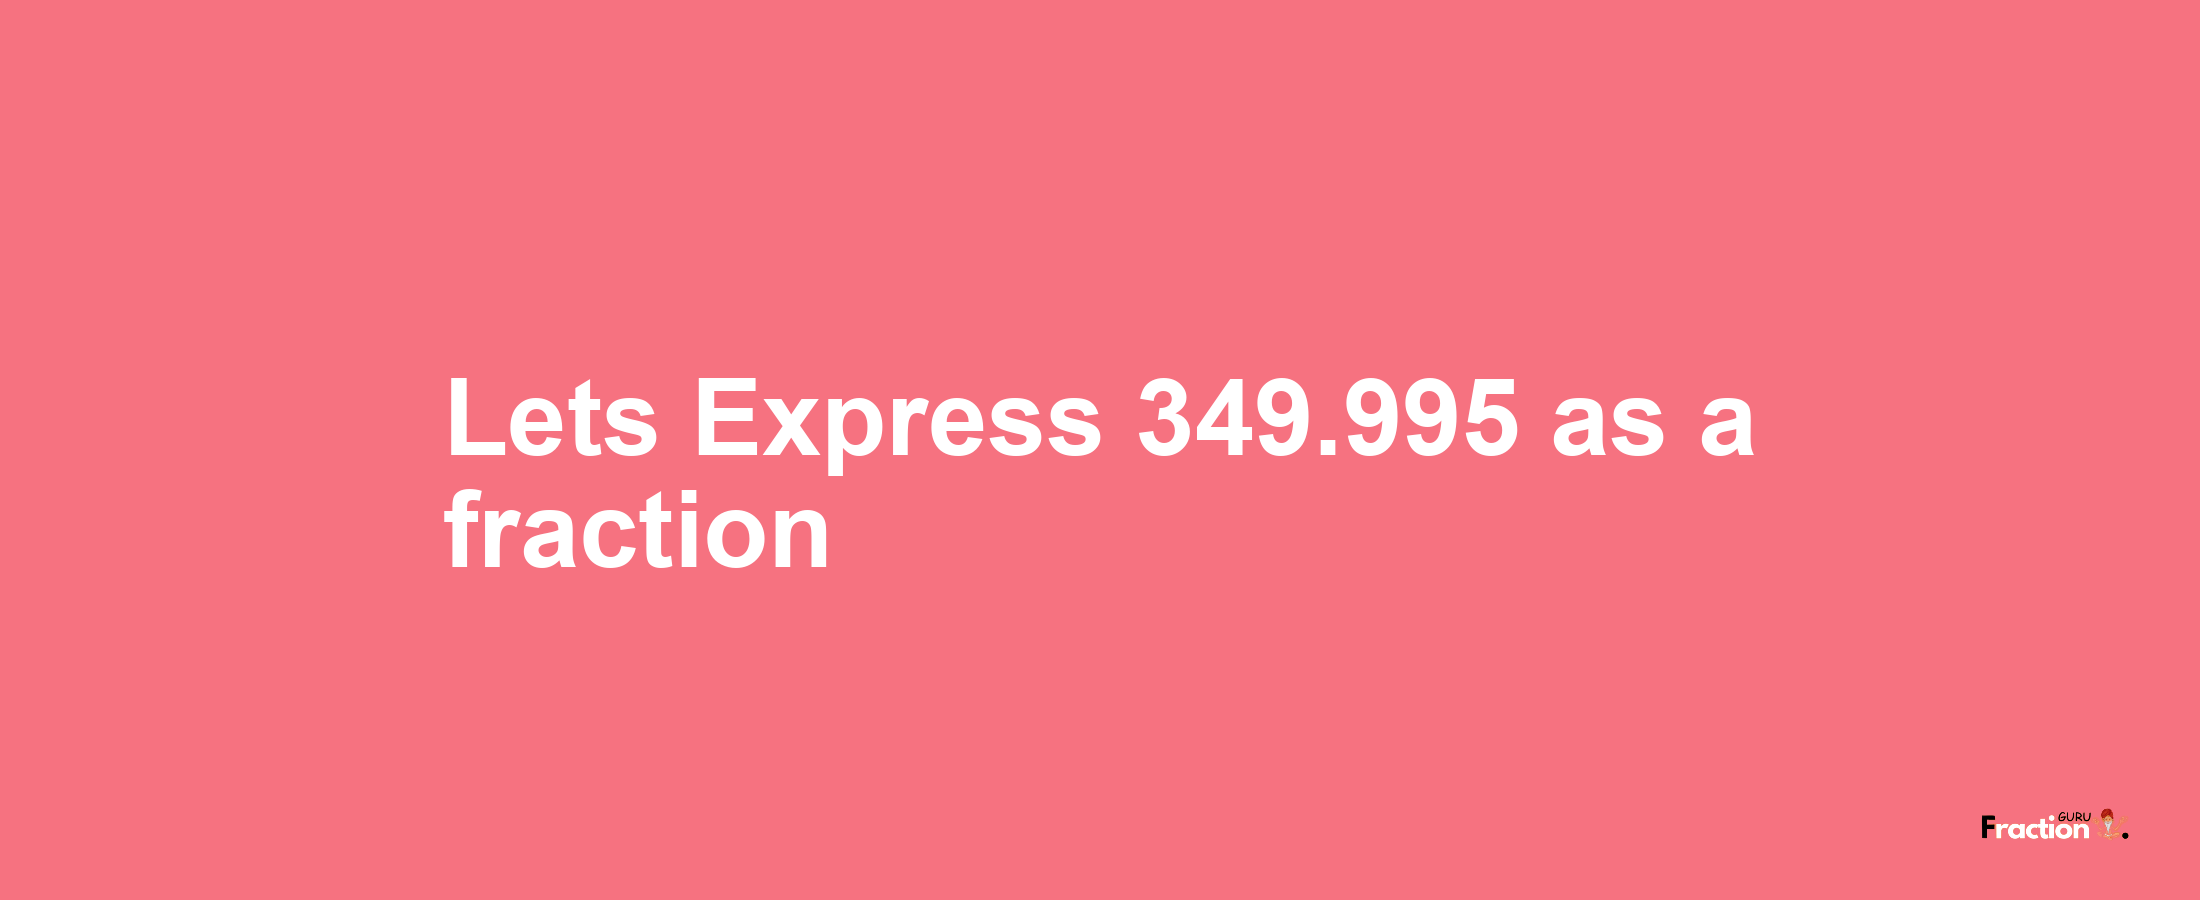 Lets Express 349.995 as afraction